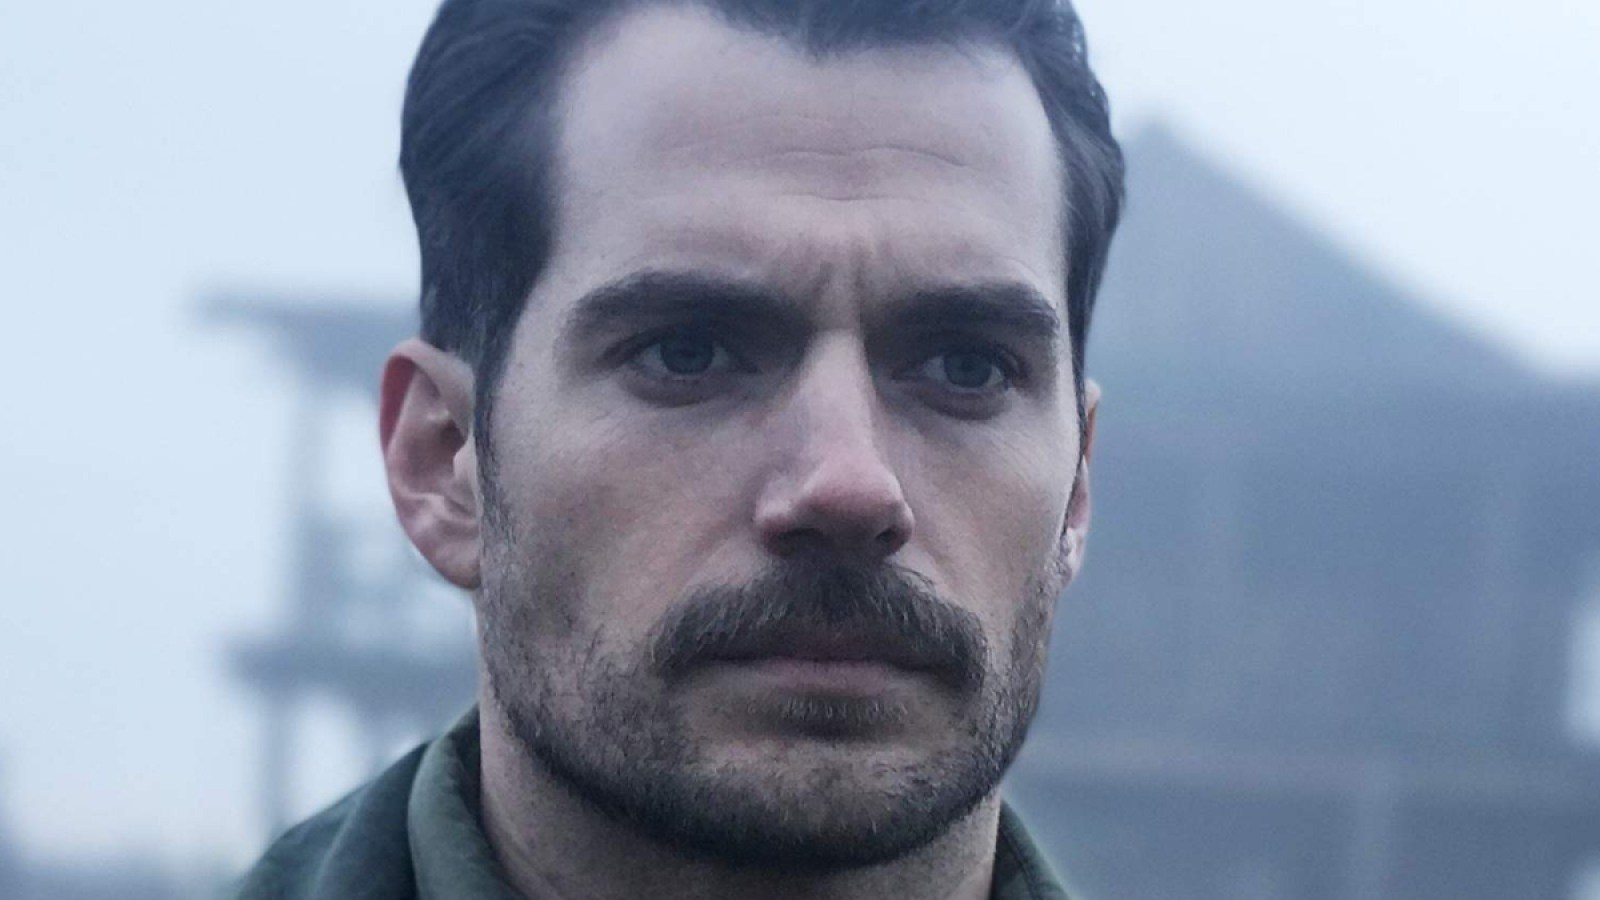 Henry Cavill sporting a mustache in 'Mission: Impossible - Fallout'